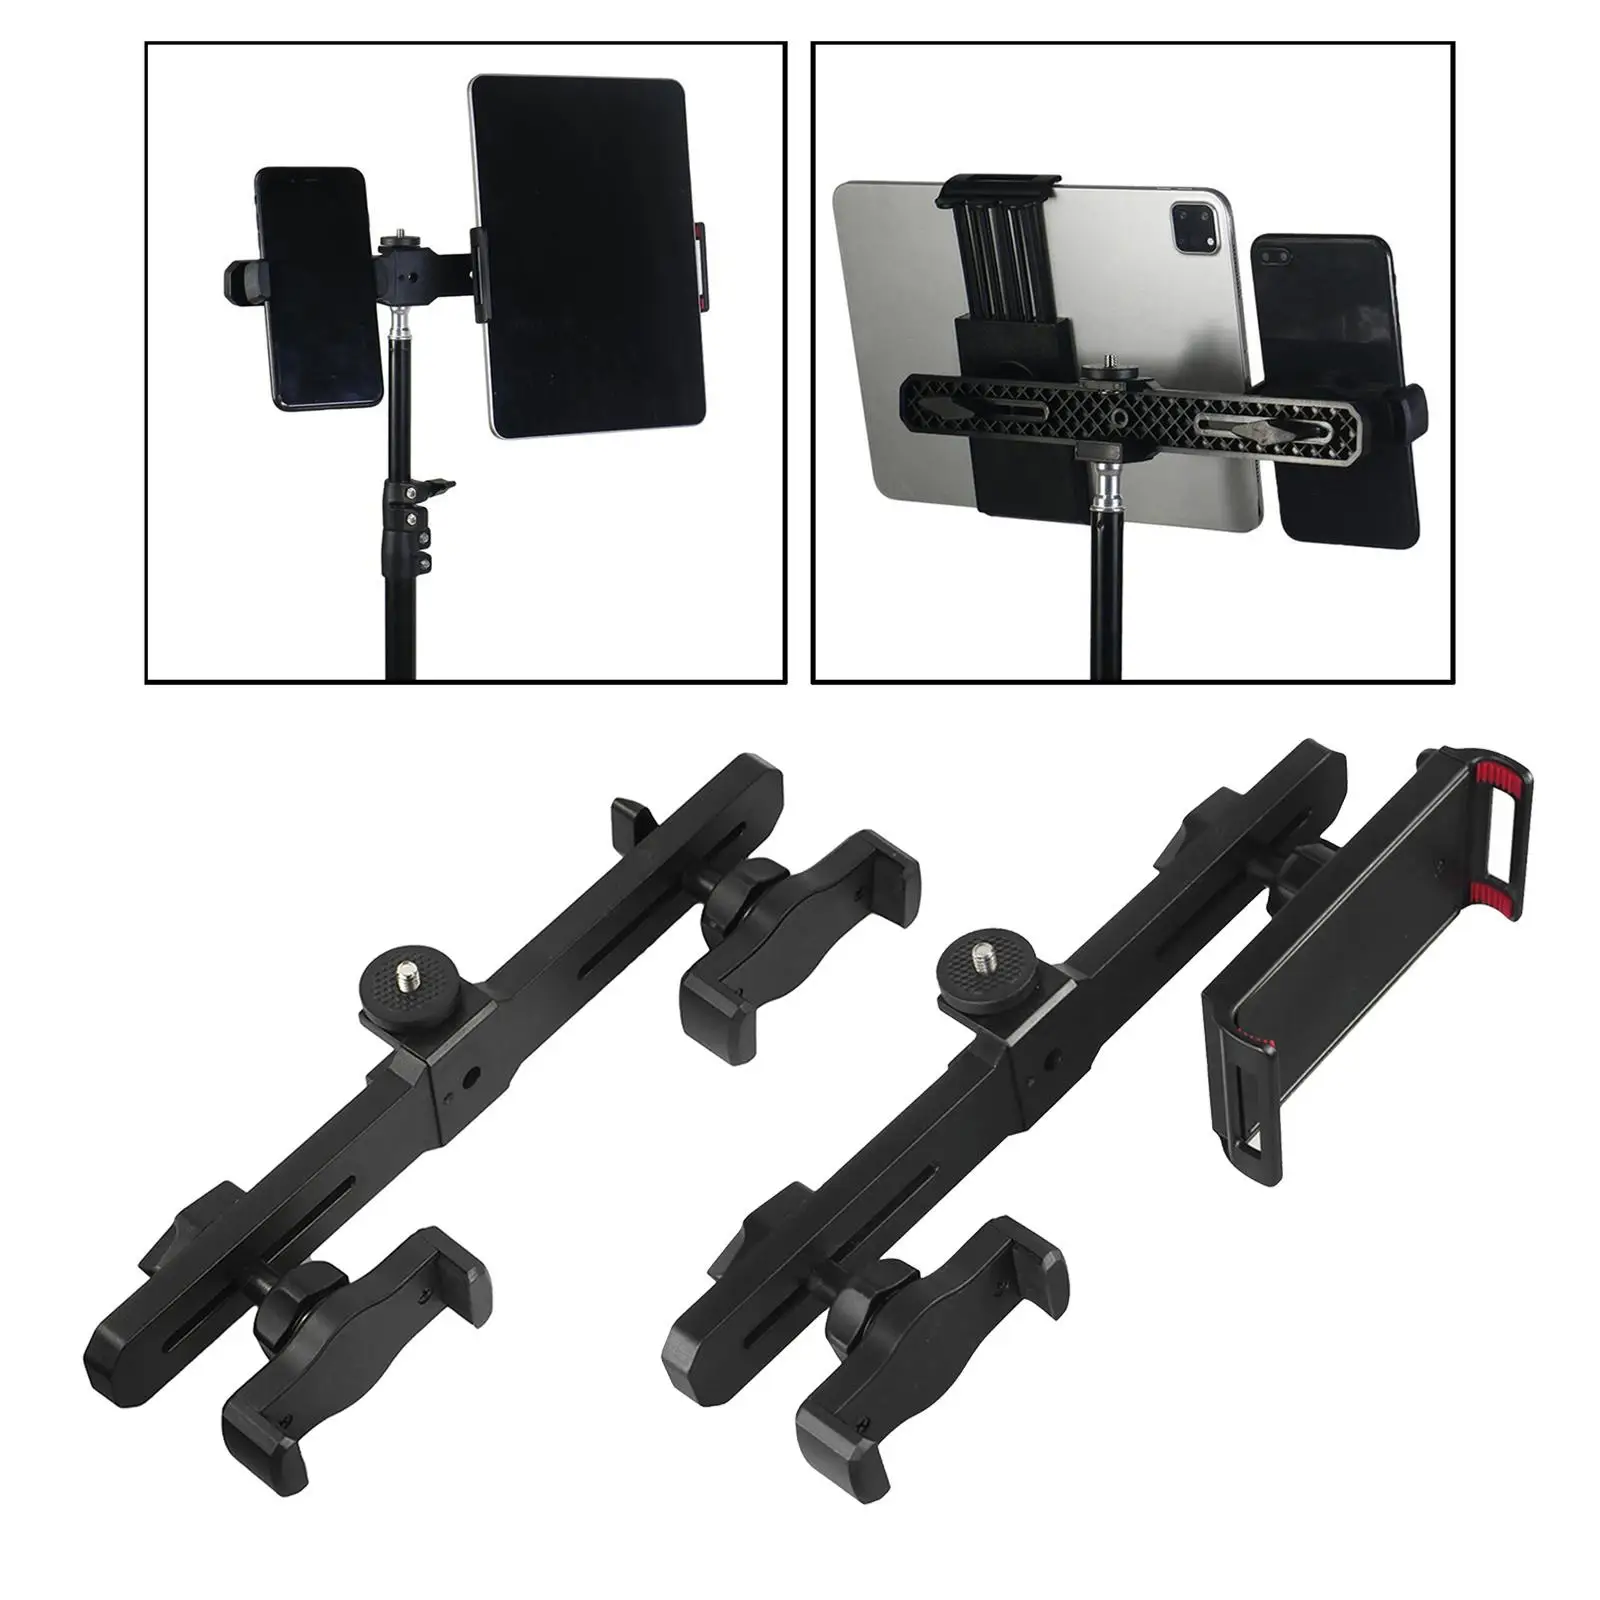 Smartphone Tablet Mount Double Clip Tripod Adjustable Movable Crossbar Clip for Living Stream Video Recording Selfie Teens Women